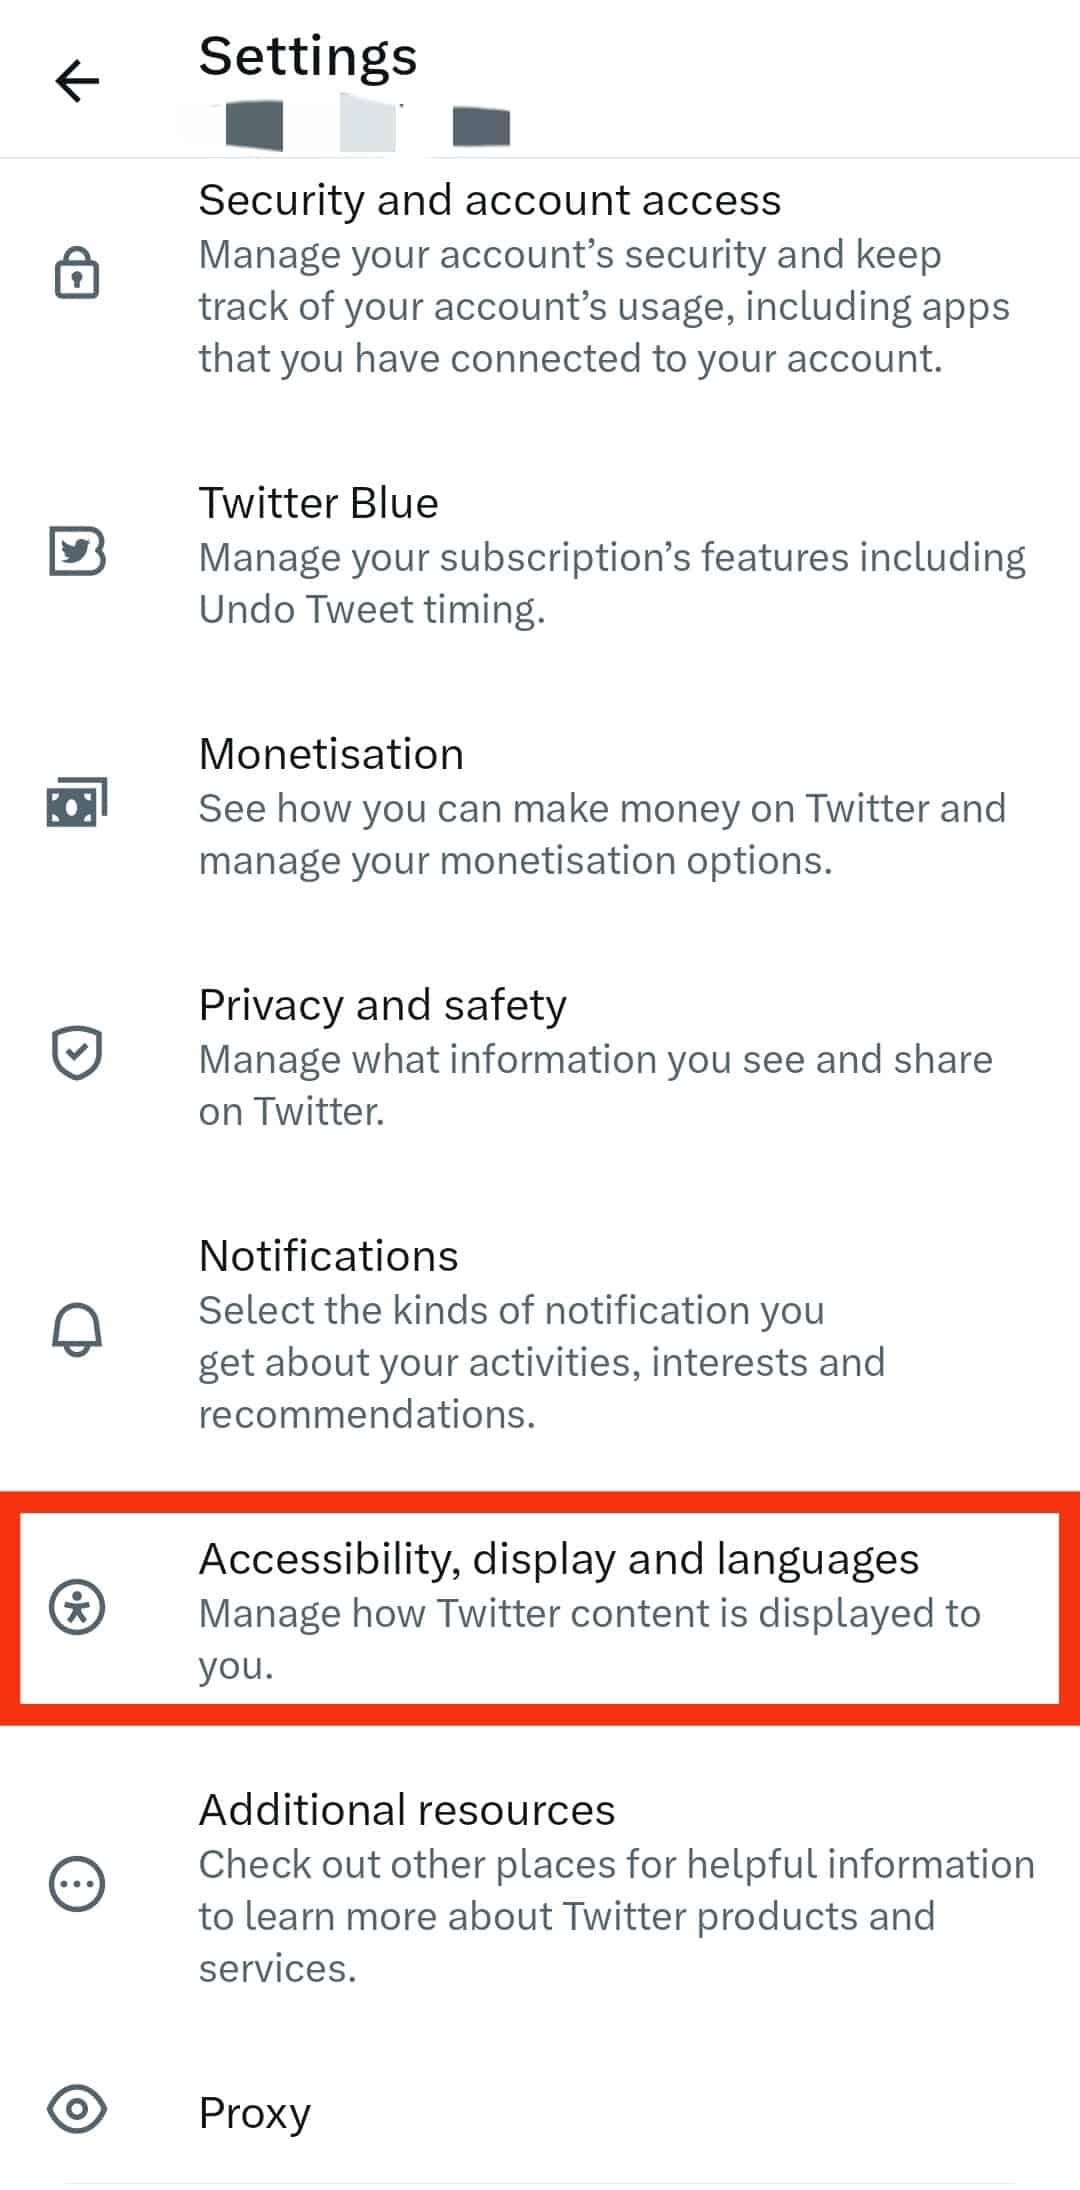 Go To The Accessibility, Display, And Languages Section